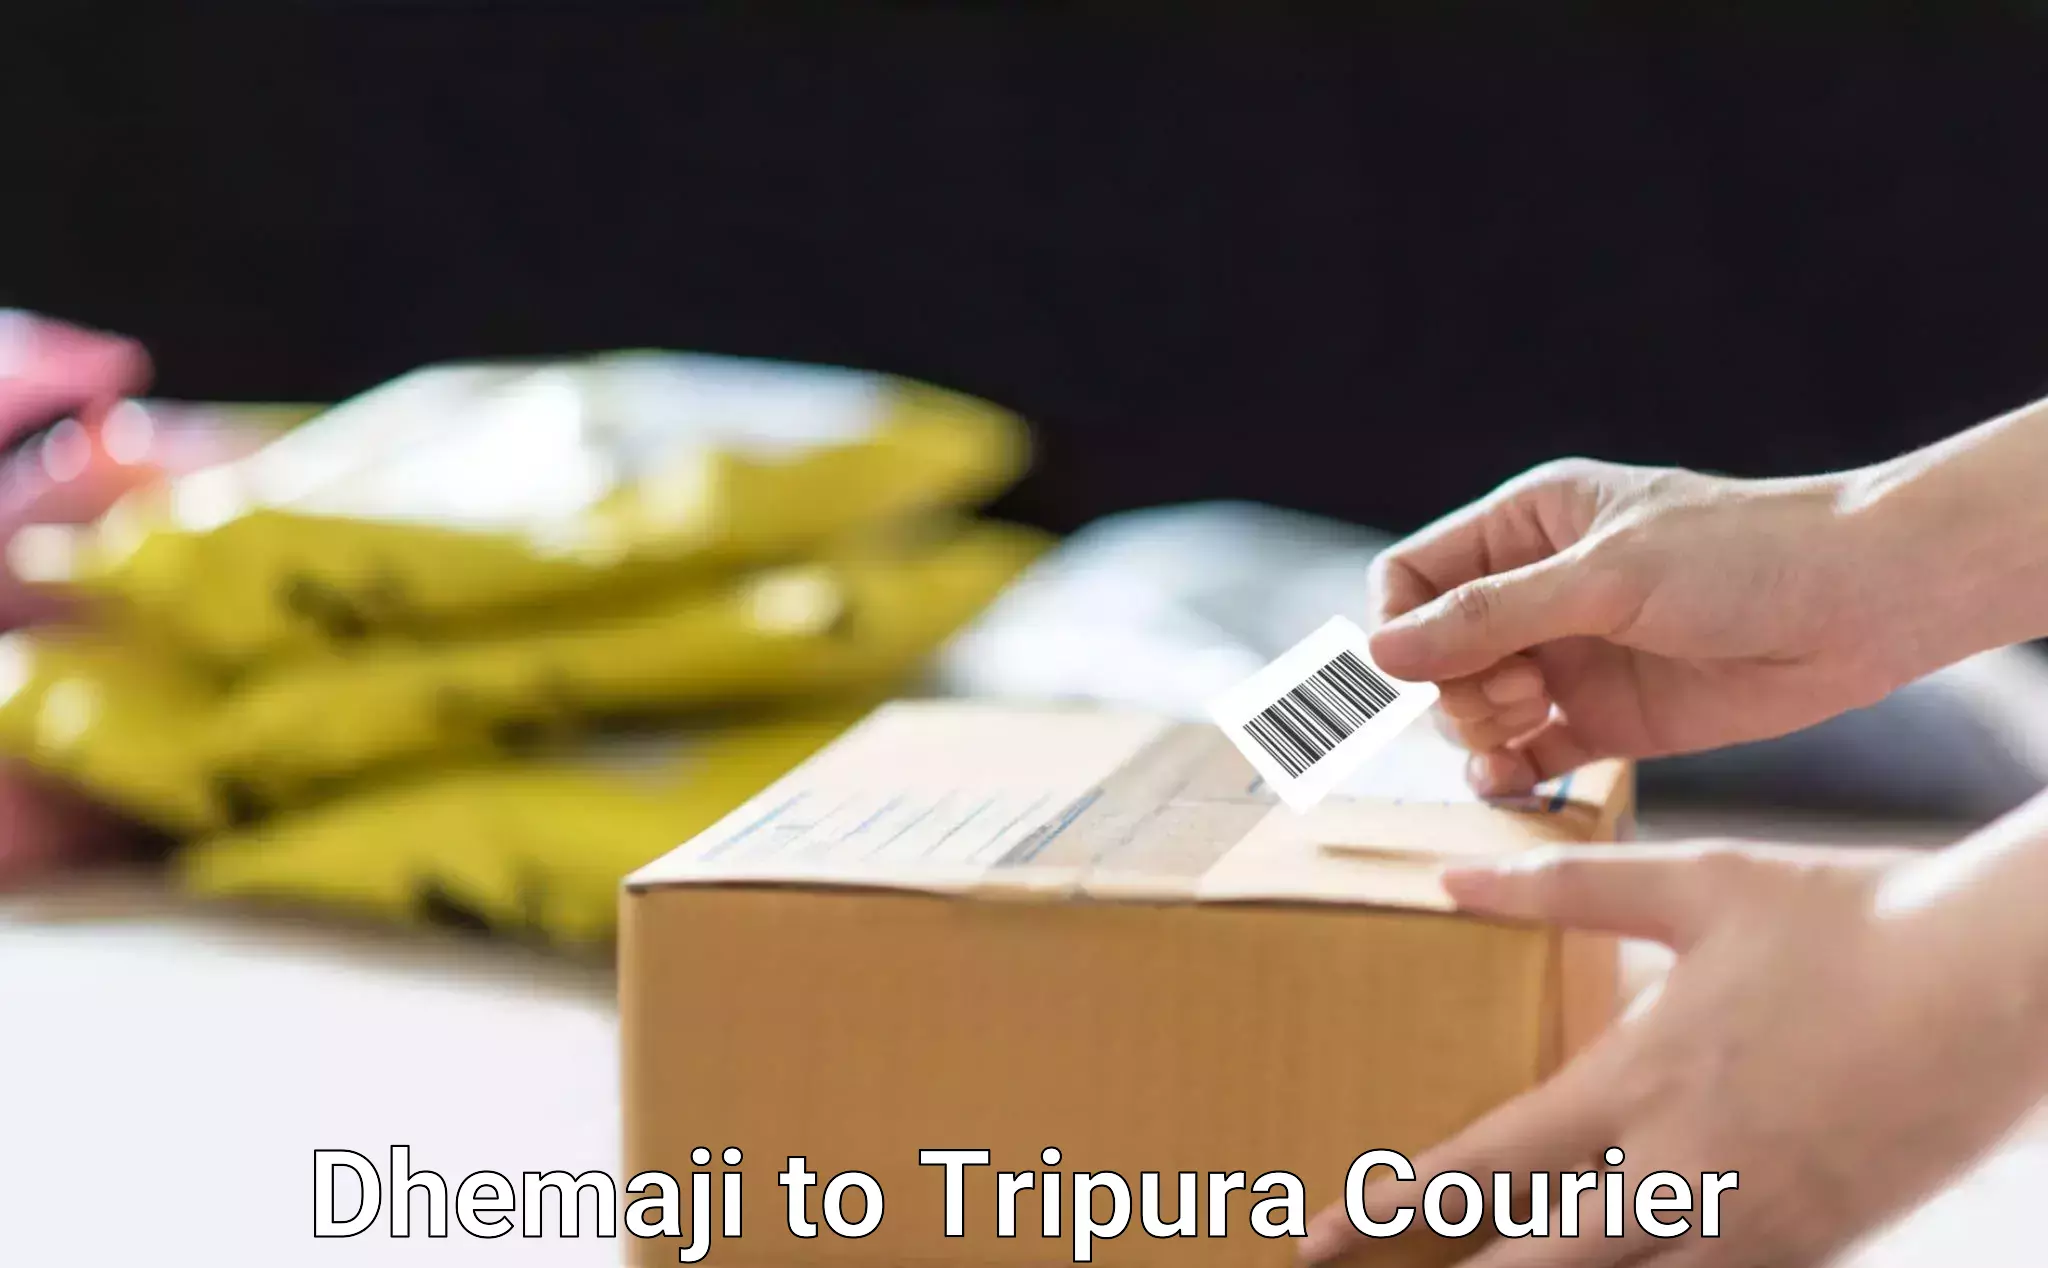 24-hour courier service Dhemaji to Udaipur Tripura